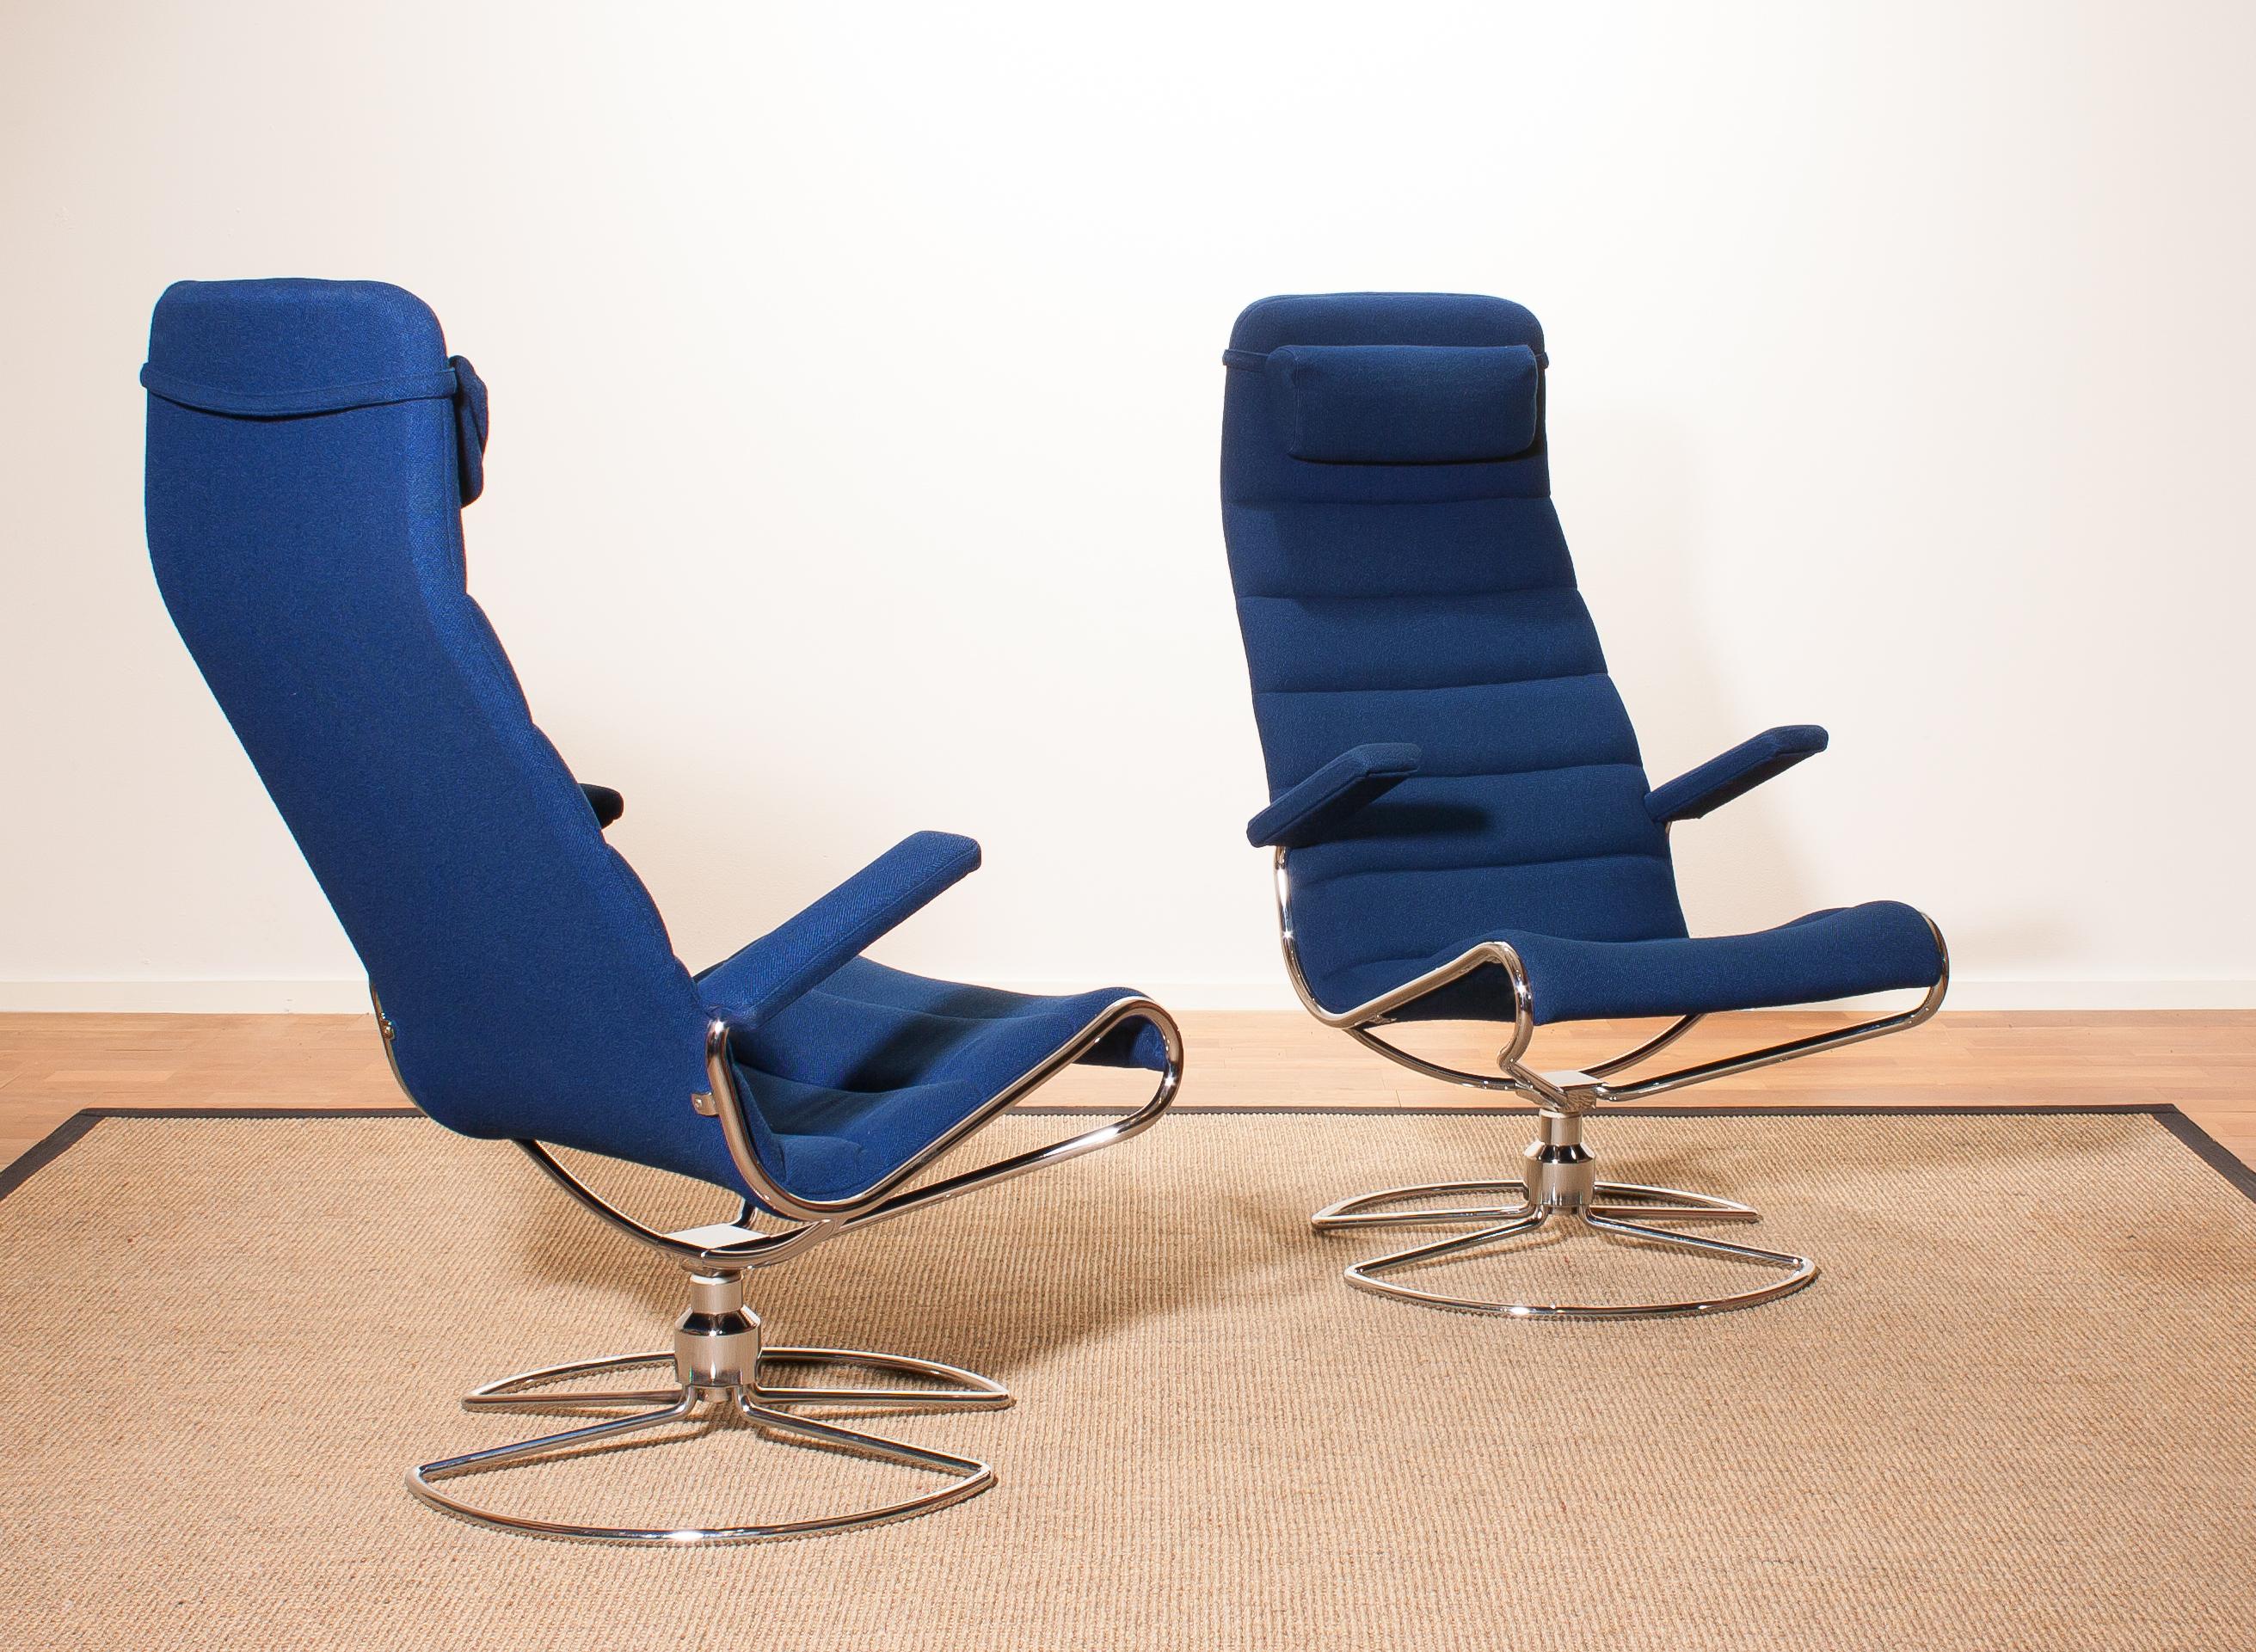 Beautiful 'Minister' chairs designed by Bruno Mathsson.
They are upholstered with a royal blue woolen fabric mounted on a swivel base of tubular chromed steel.
The chairs are in very good condition.
Period 1980s.
Dimensions: H 109 cm, W 60 cm, D